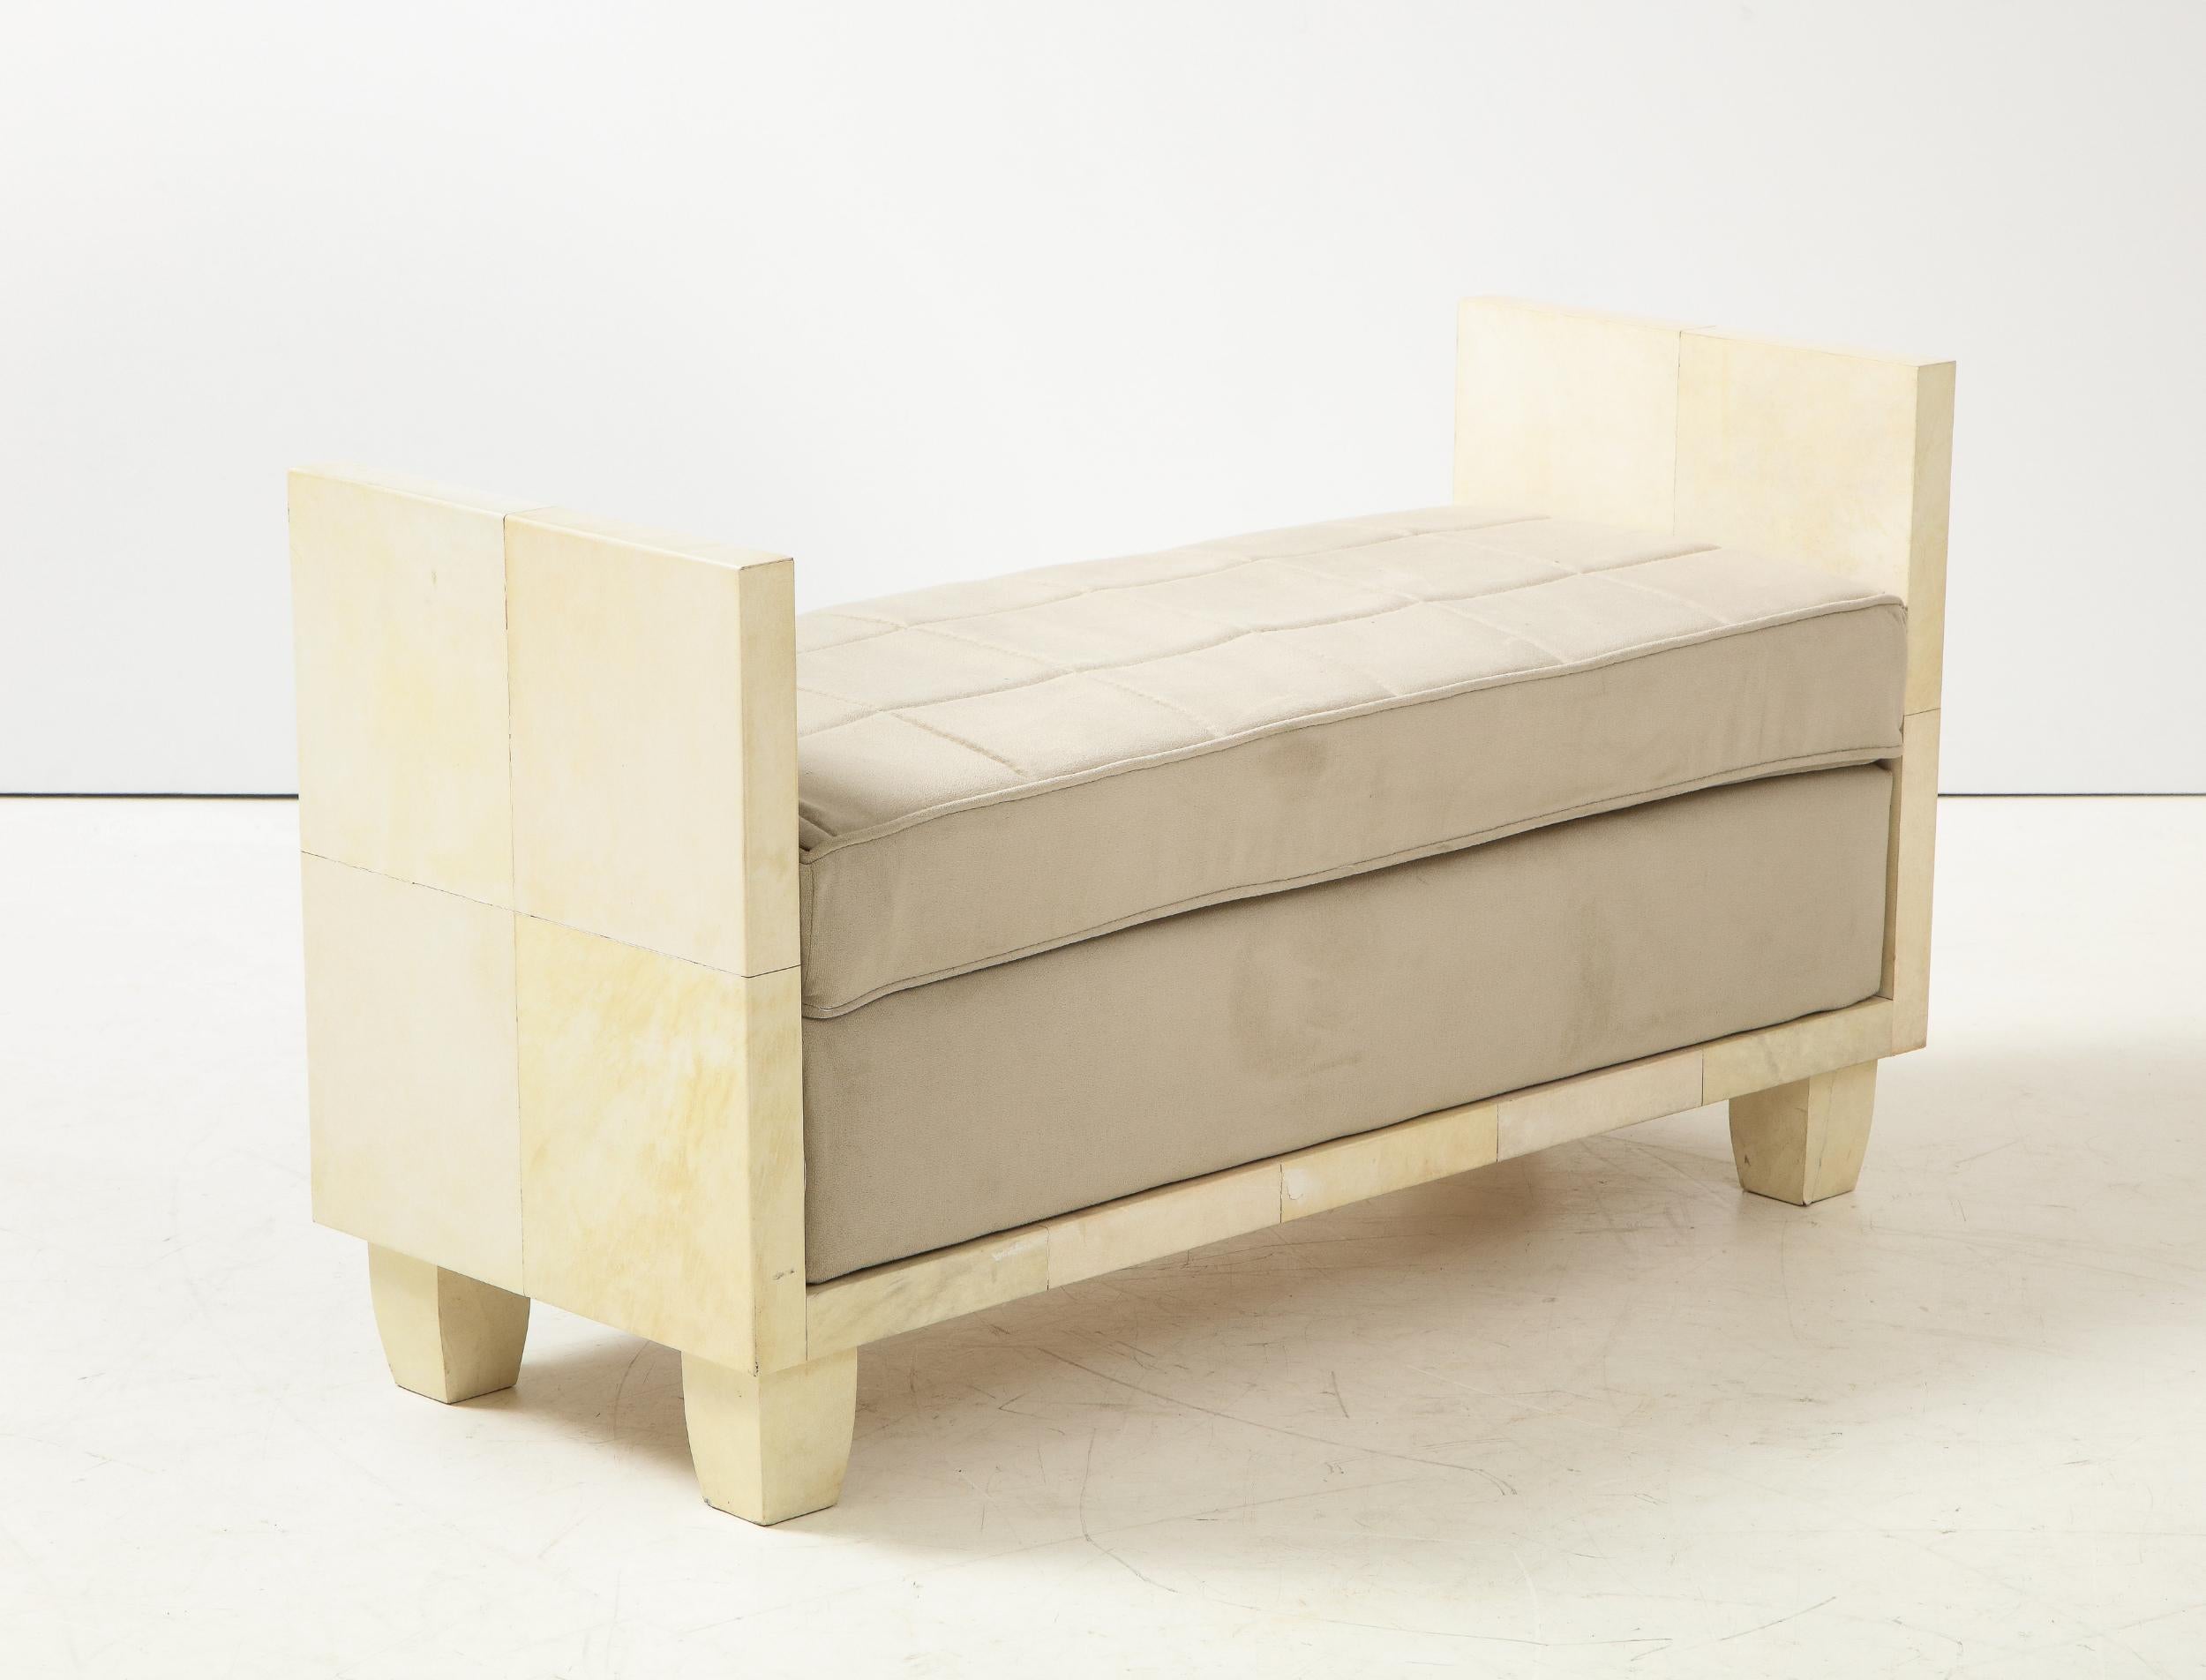 Wood Parchment Benches in the manner of Jean-Michel Frank